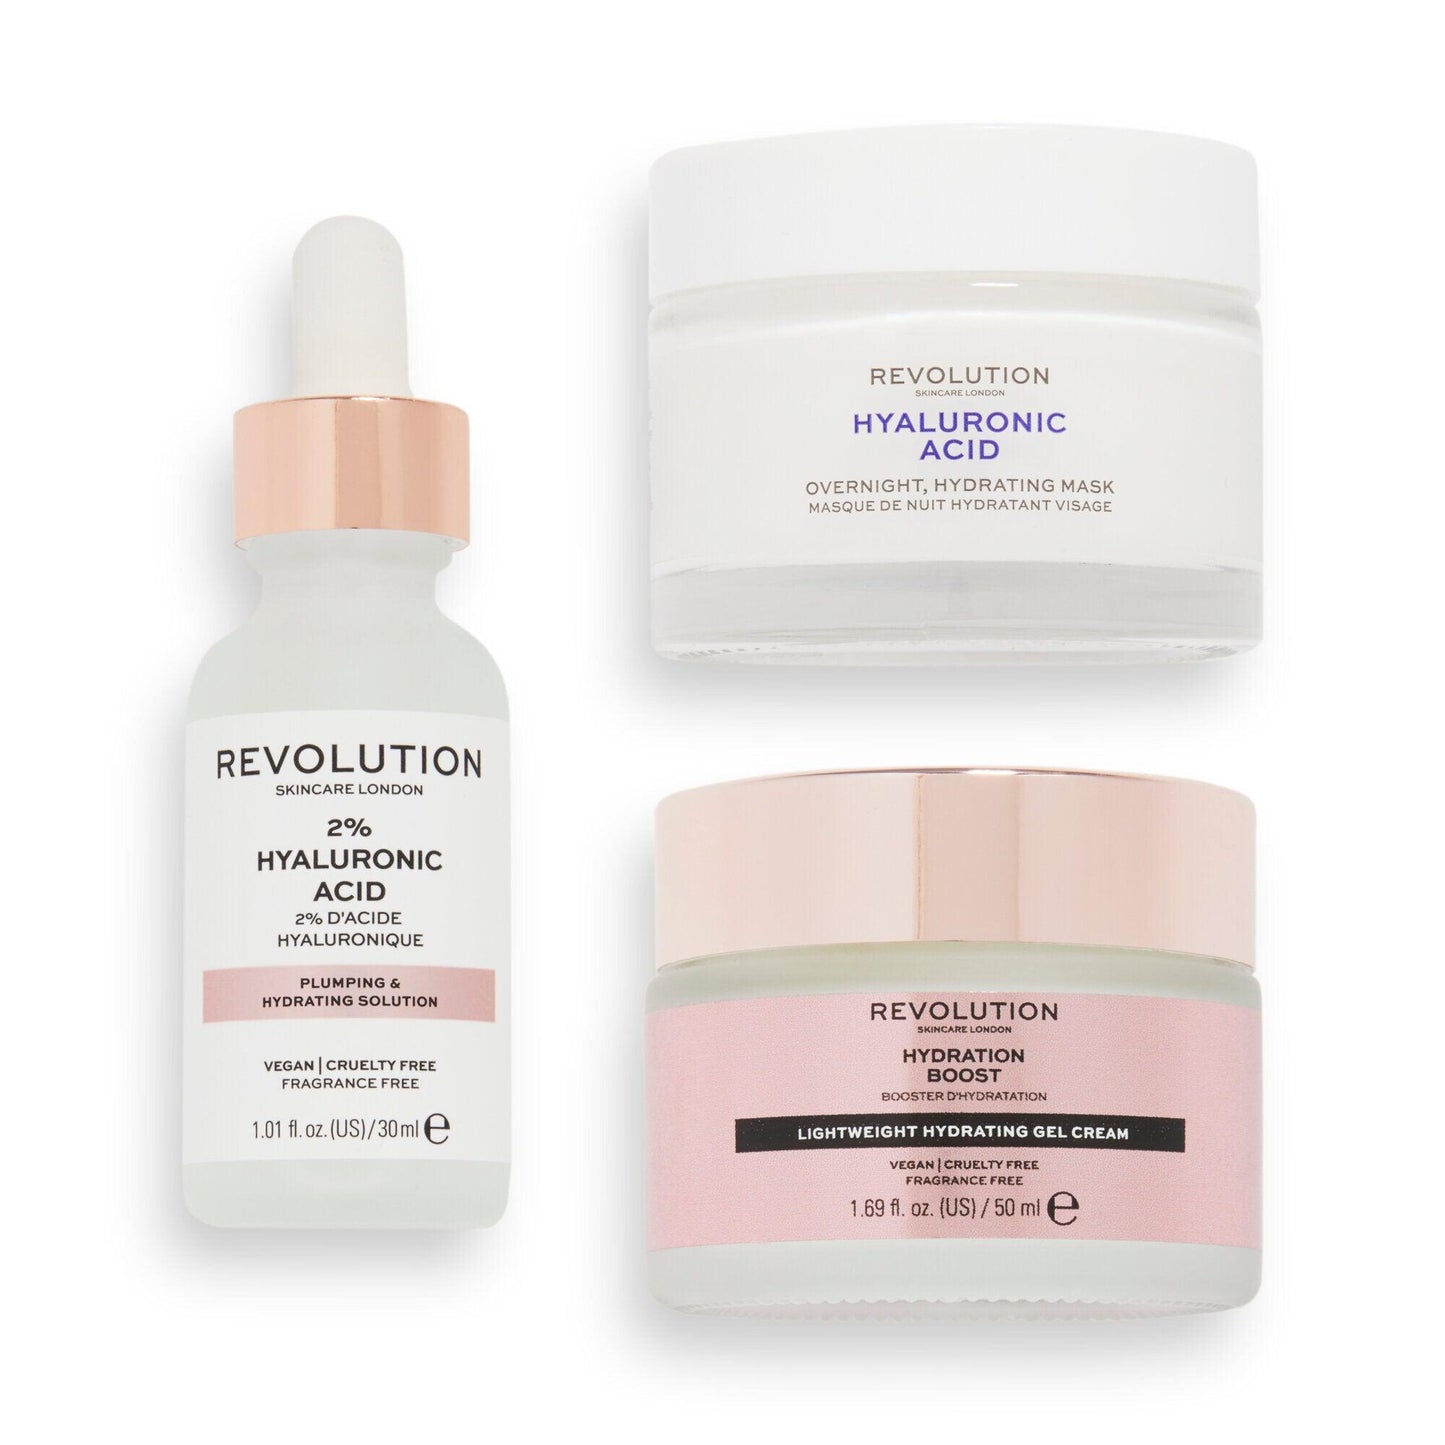 REVOLUTION SKINCARE FRAGRANCE FREE FAVOURITES COLLECTION